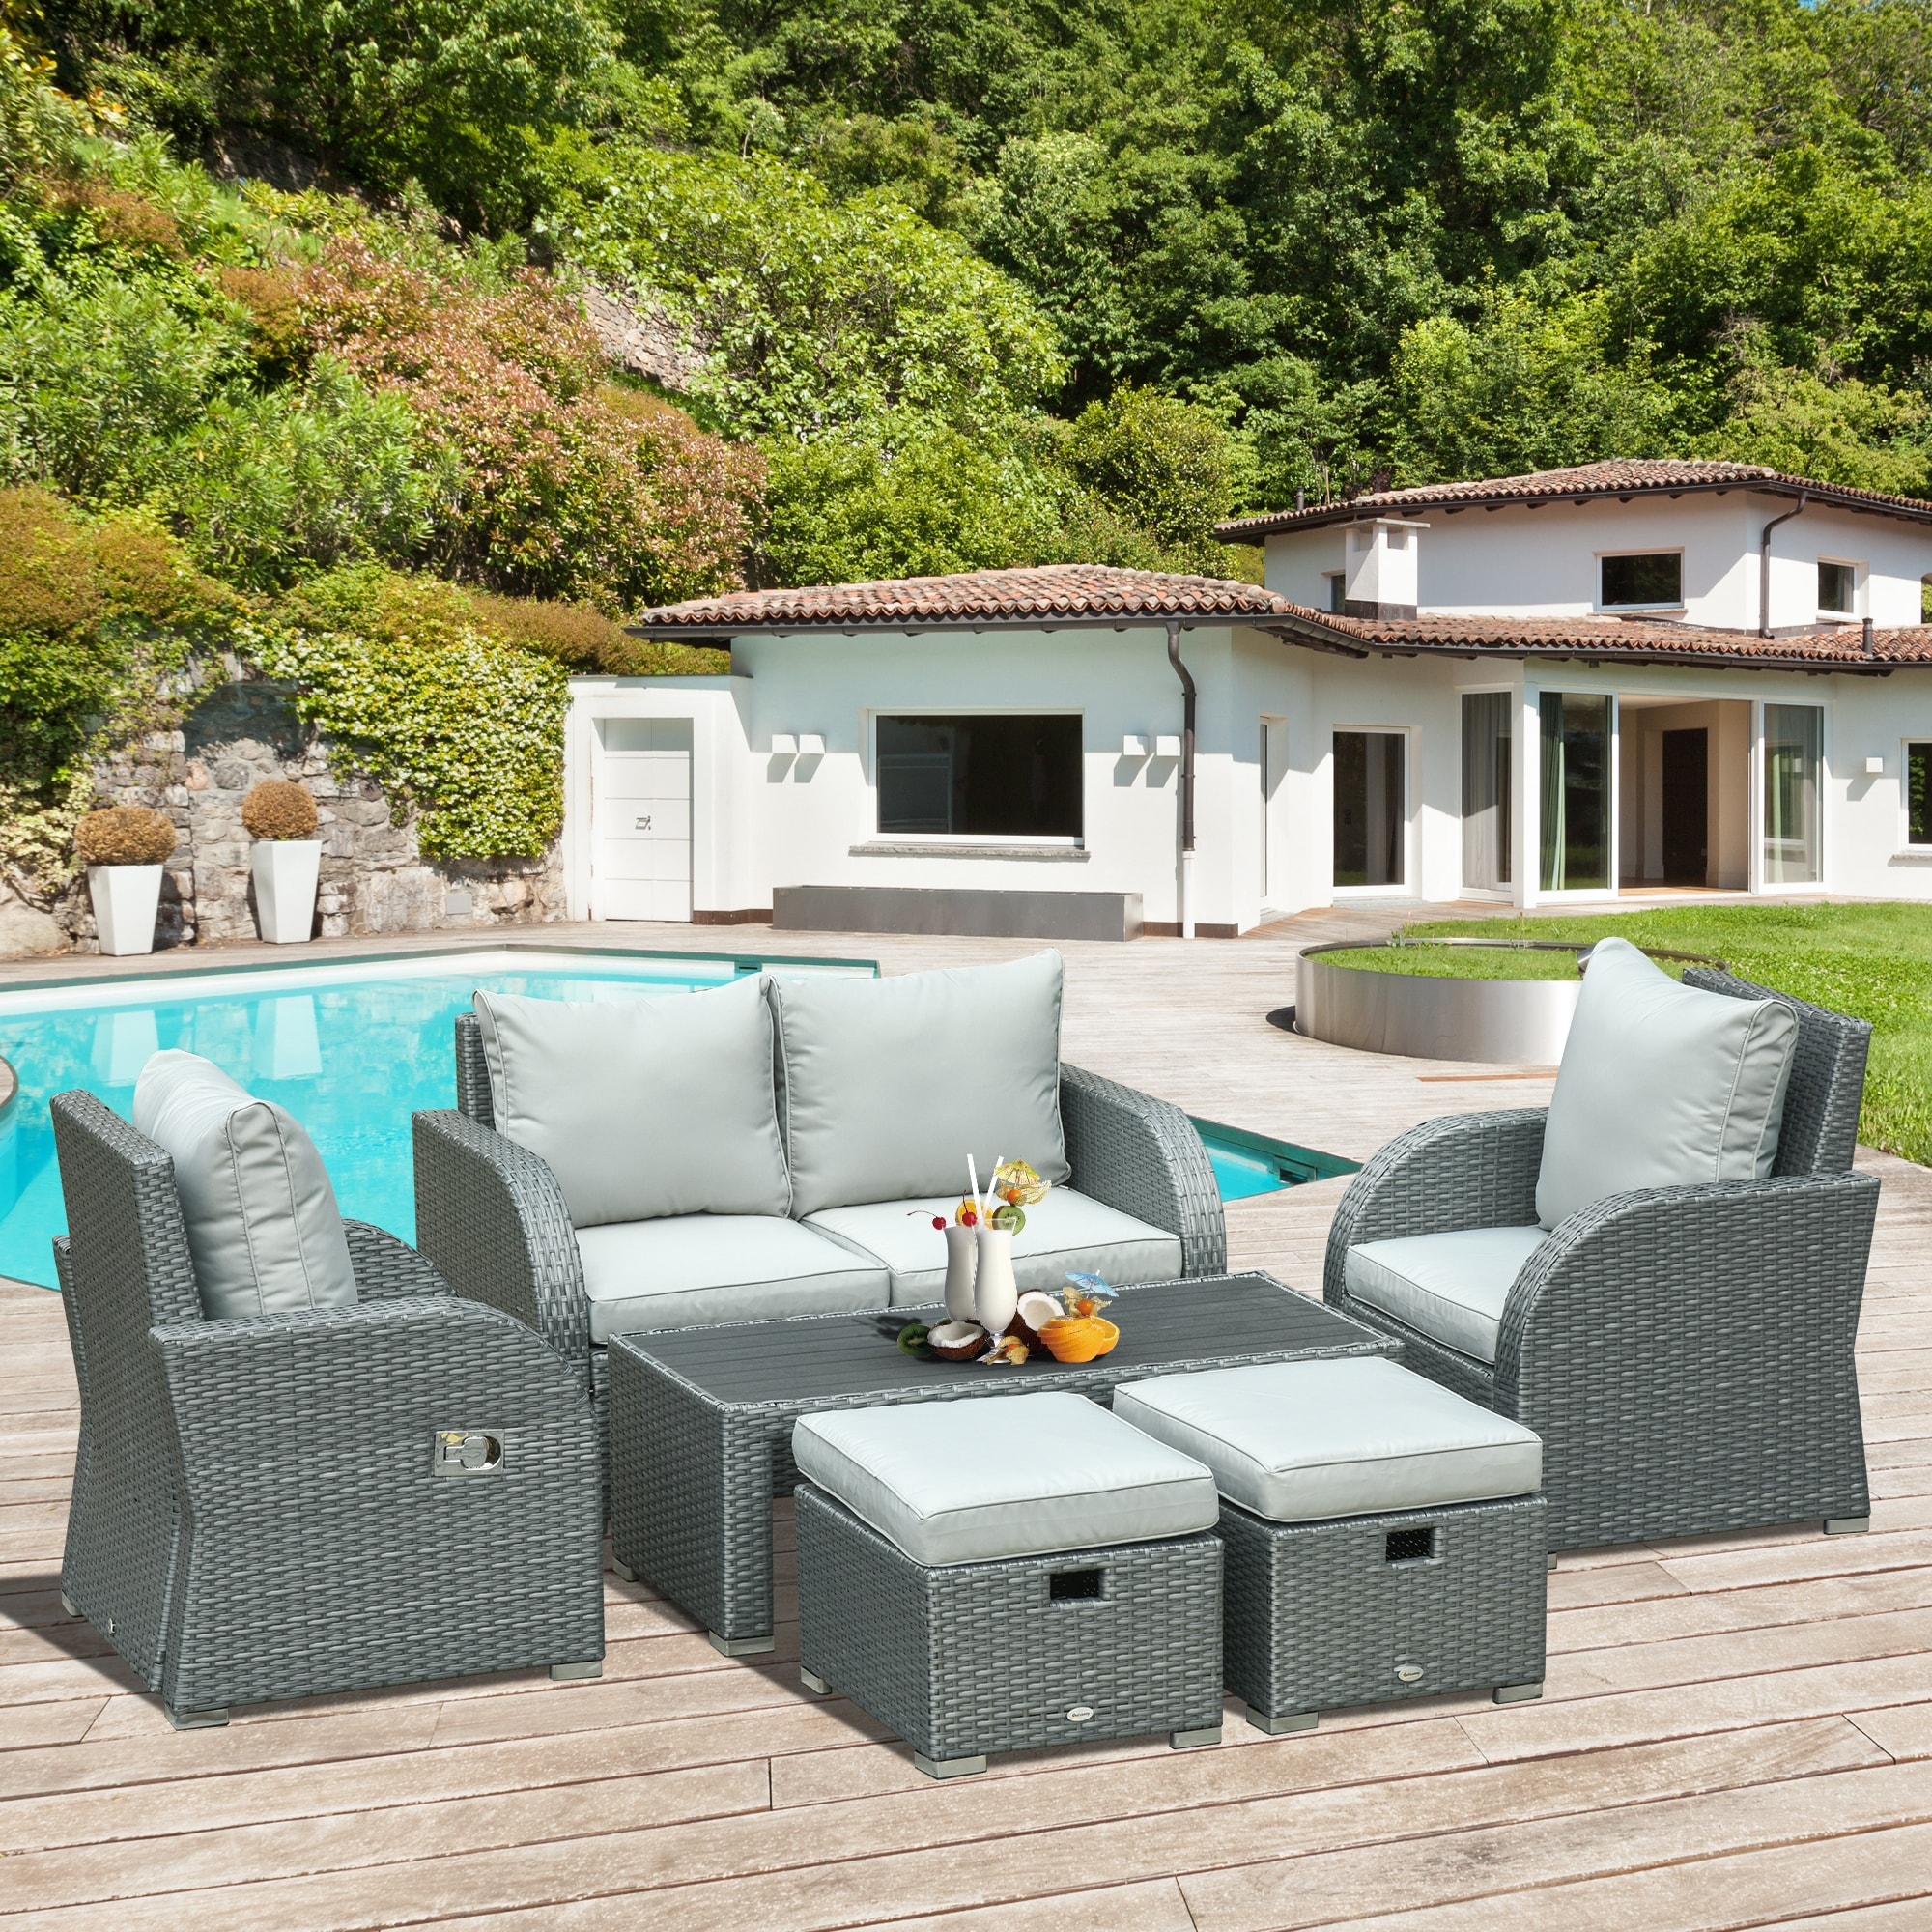 Outsunny 6 Pcs Outdoor Rattan Wicker Sofa Set Patio All Weather Furniture W/ Tea Table and Cushion For Backyard Garden Grey